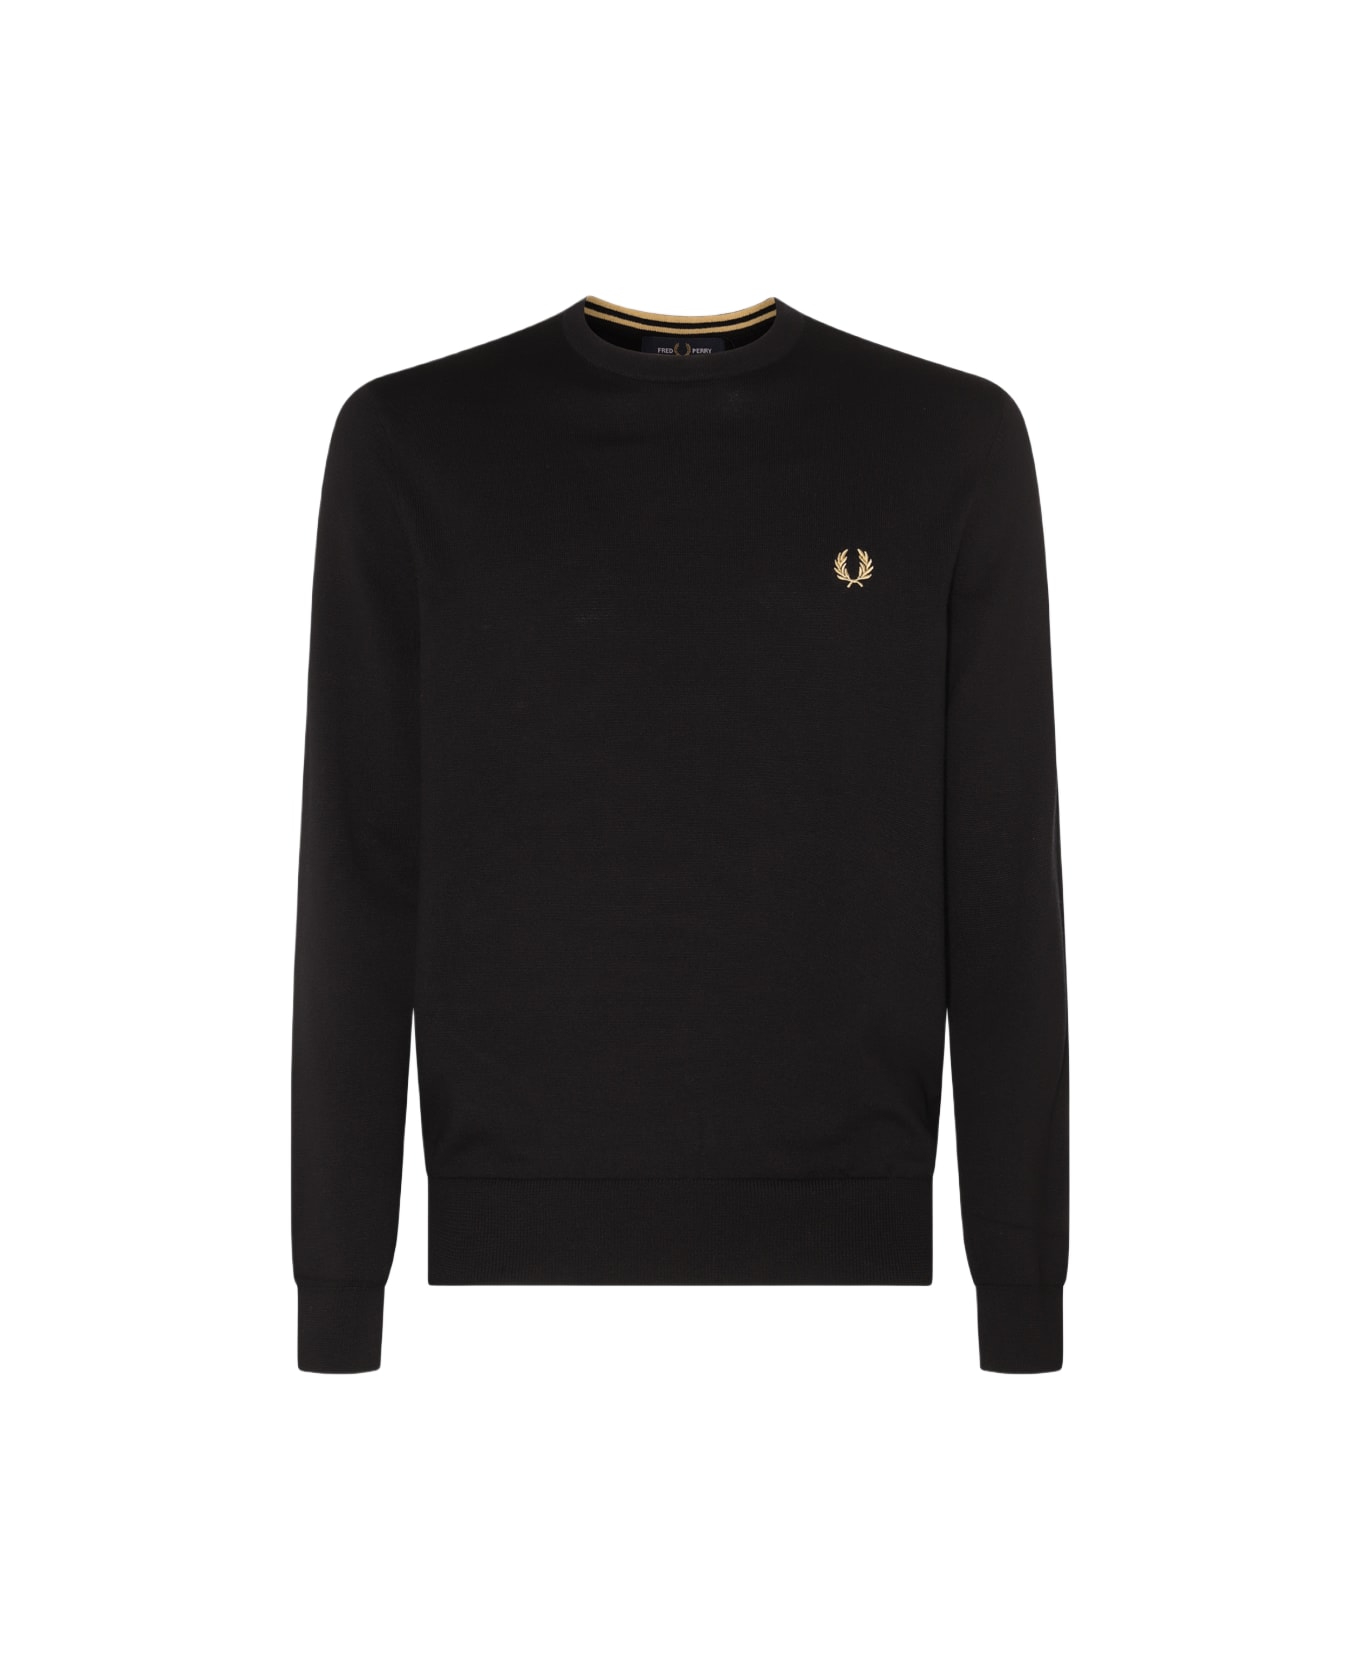 Fred Perry Black Cotton-wool Blend Jumper - Black